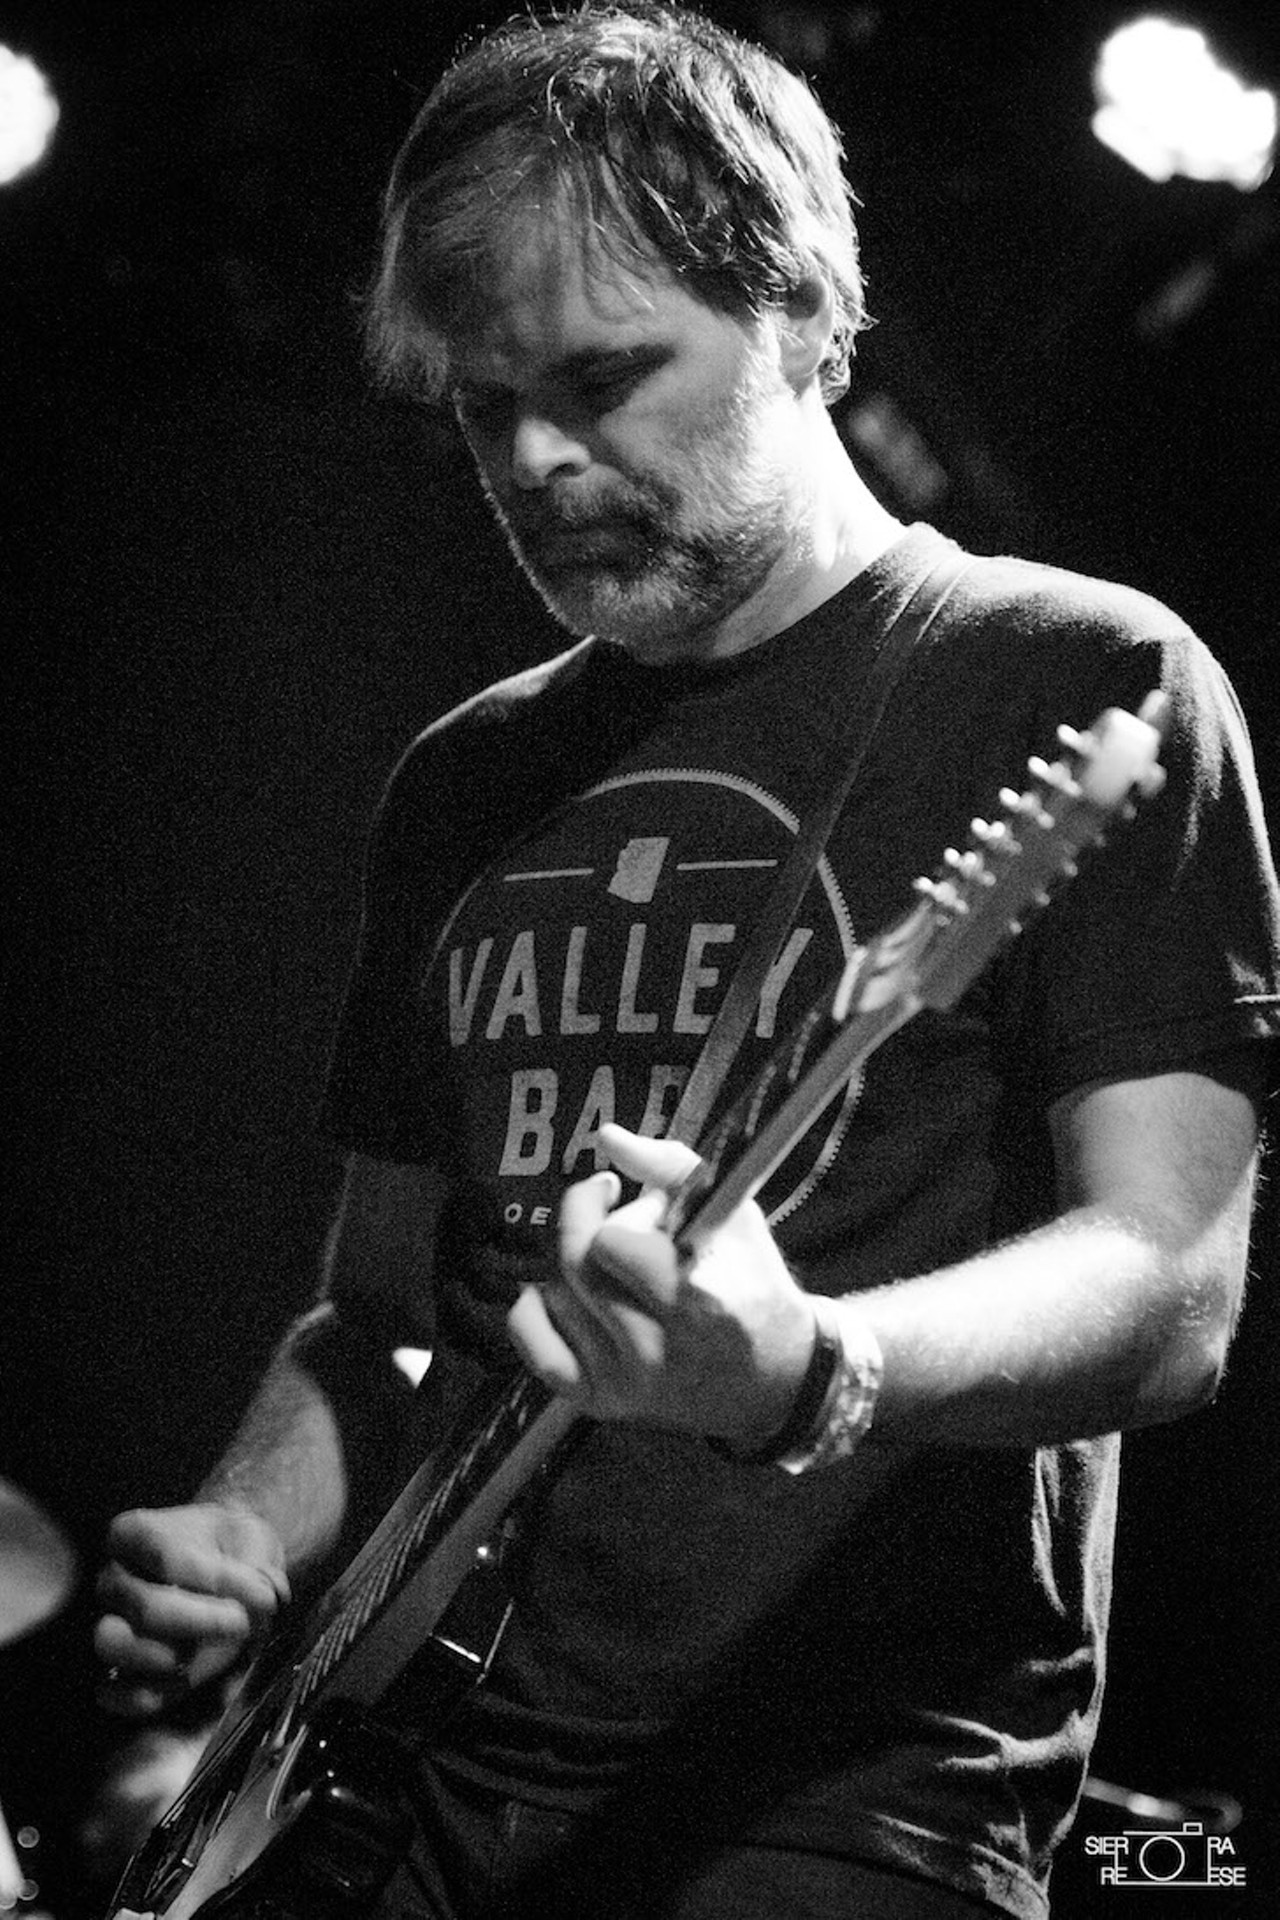 Photos from Local H at the Social